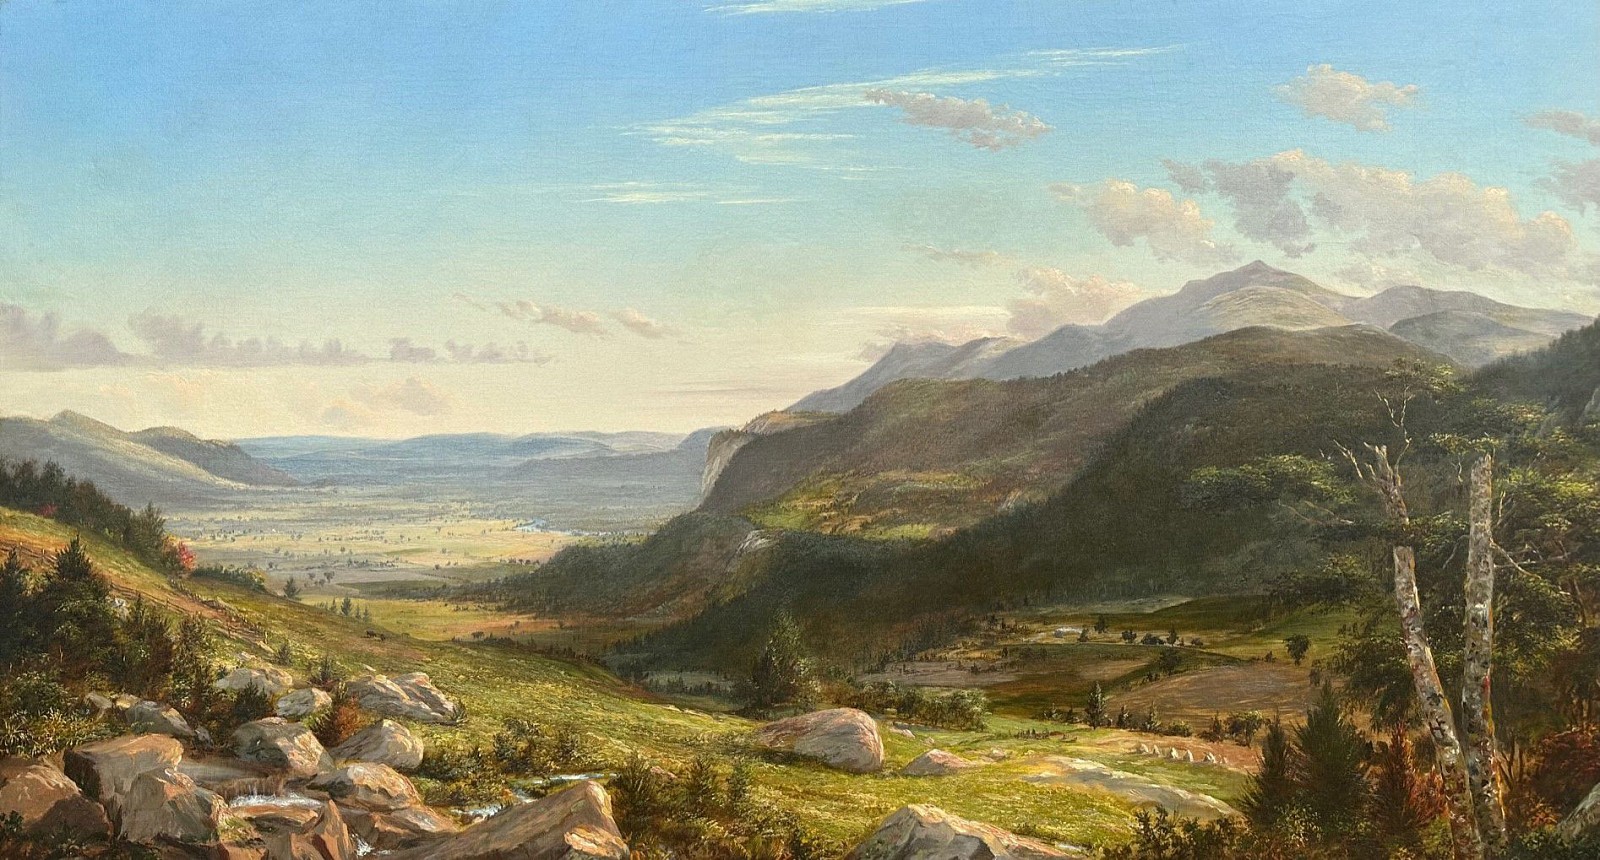 Charles DeWolf Brownell, The Source of the River, 1861
oil on canvas, 24"" x 44""
JCA 6747
$35,000